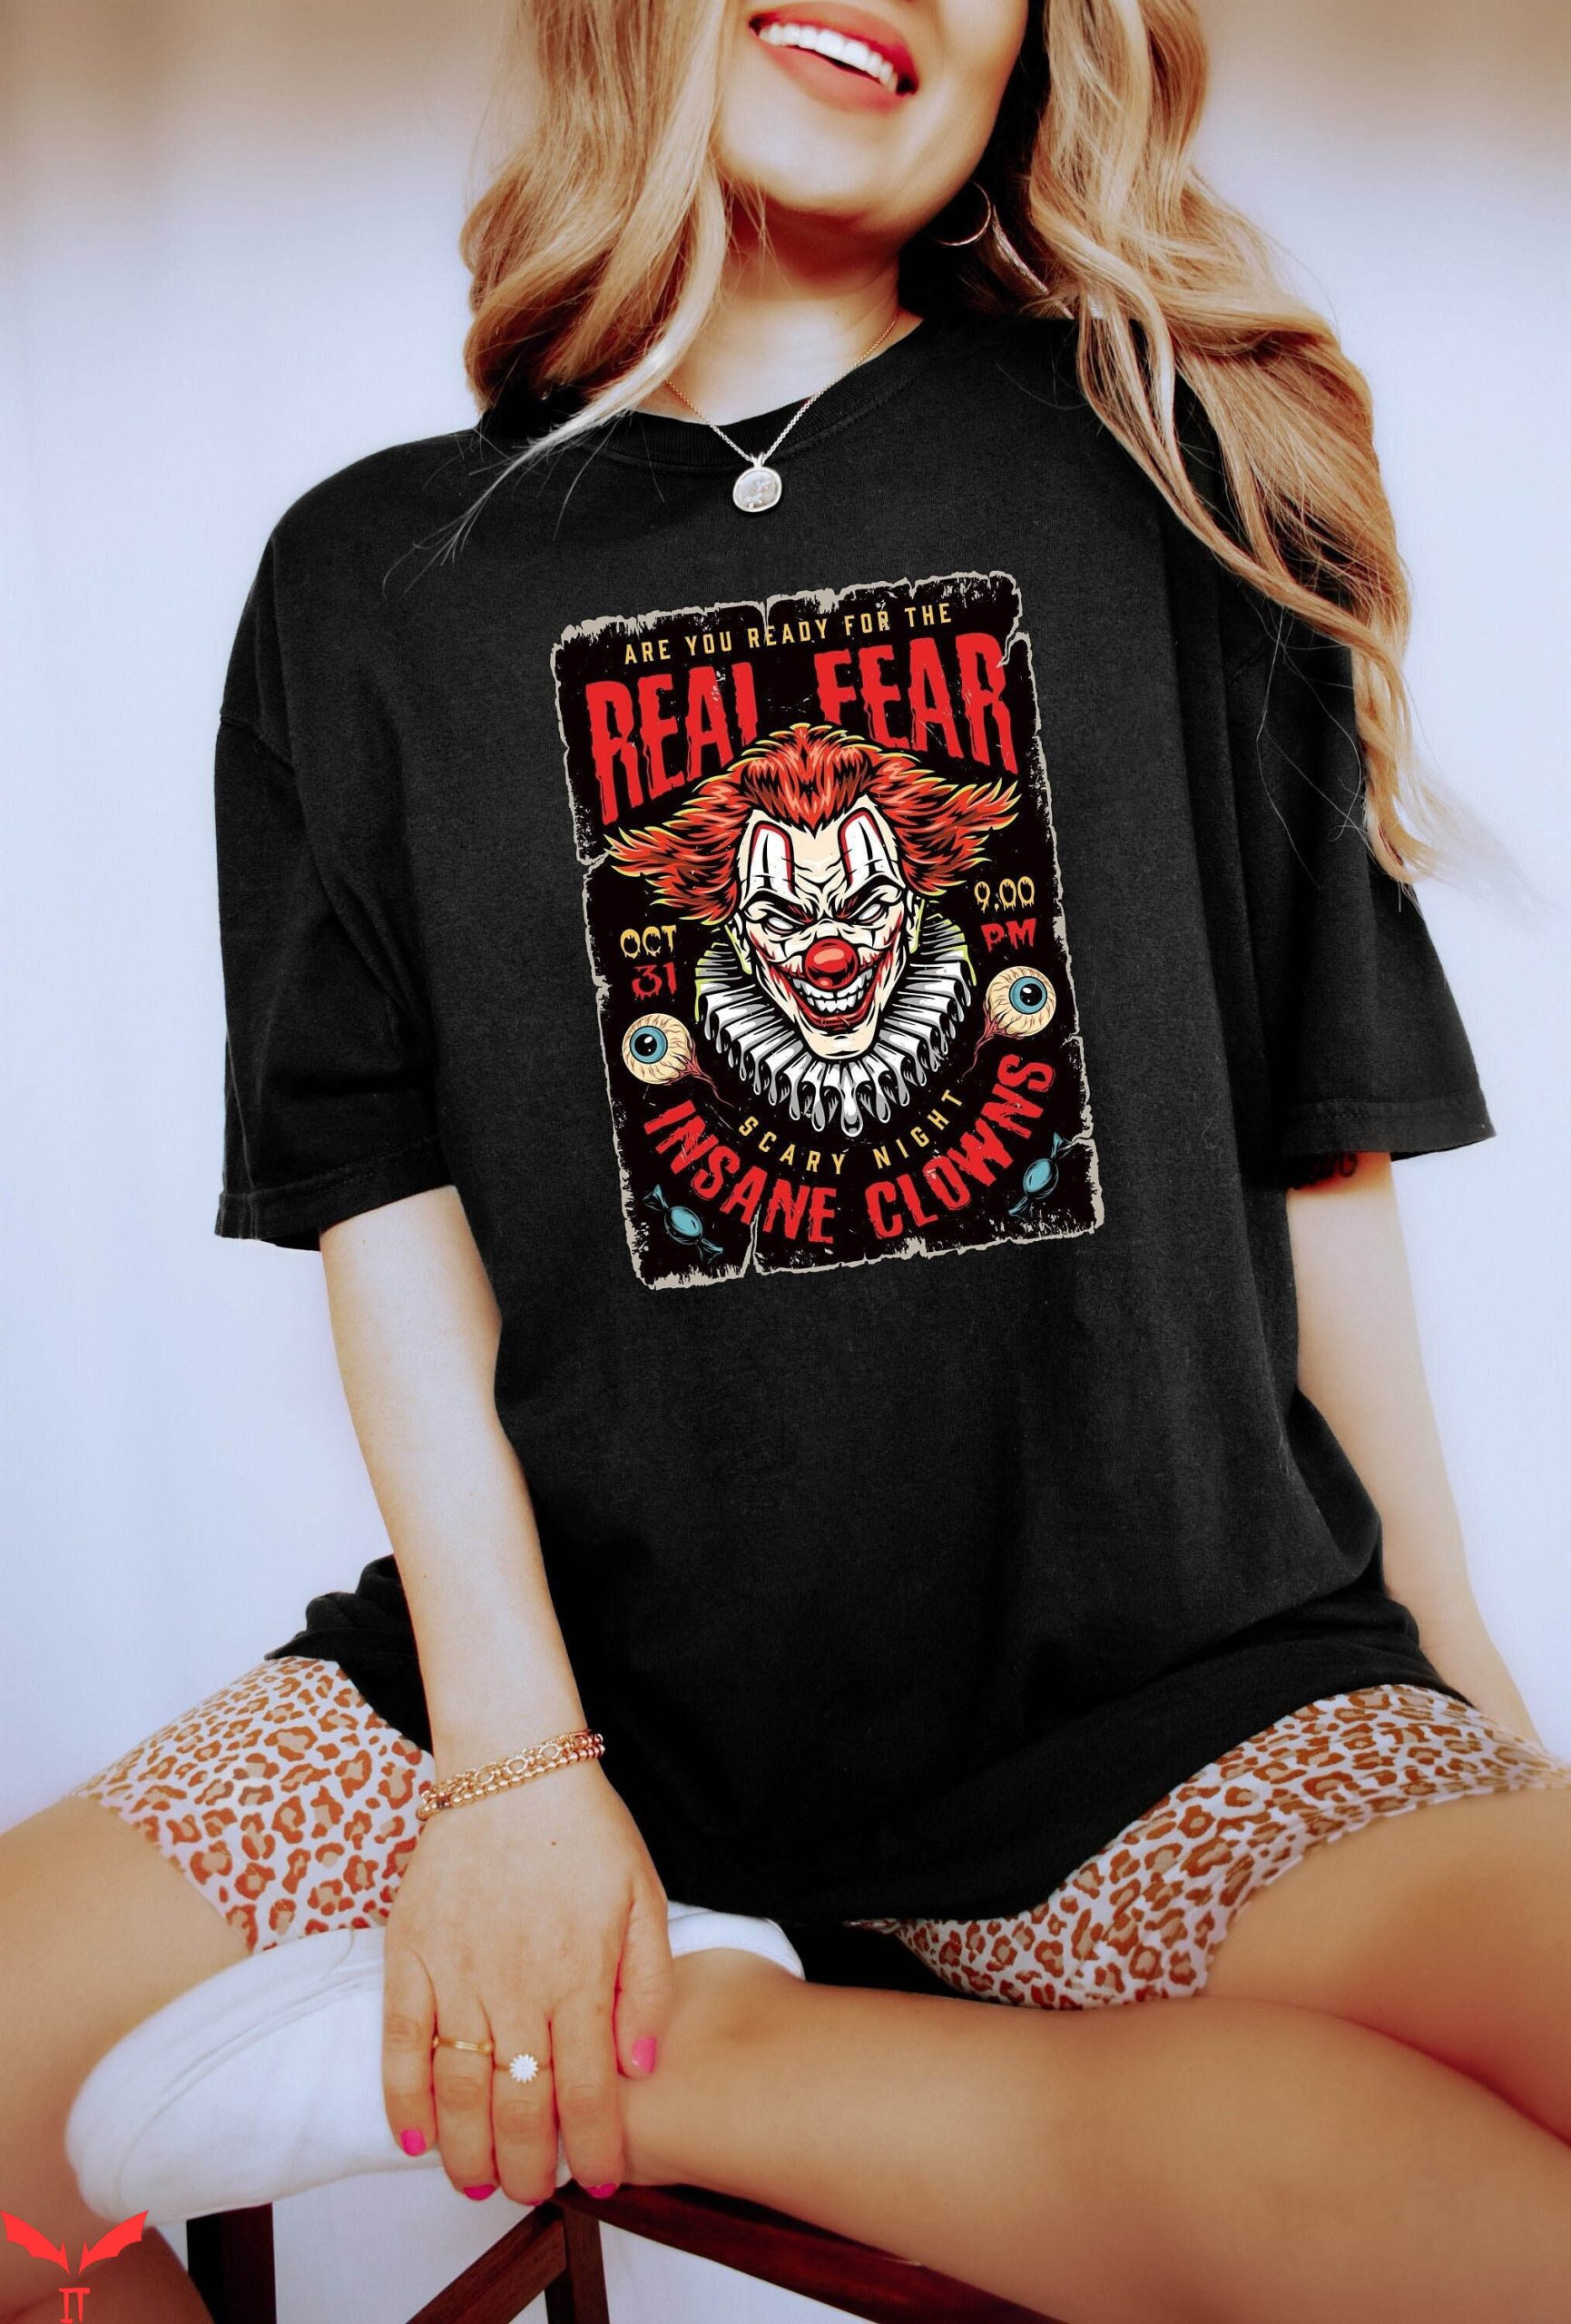 Pennywise Clown T Shirt Gothic Scary Insane Clown Face